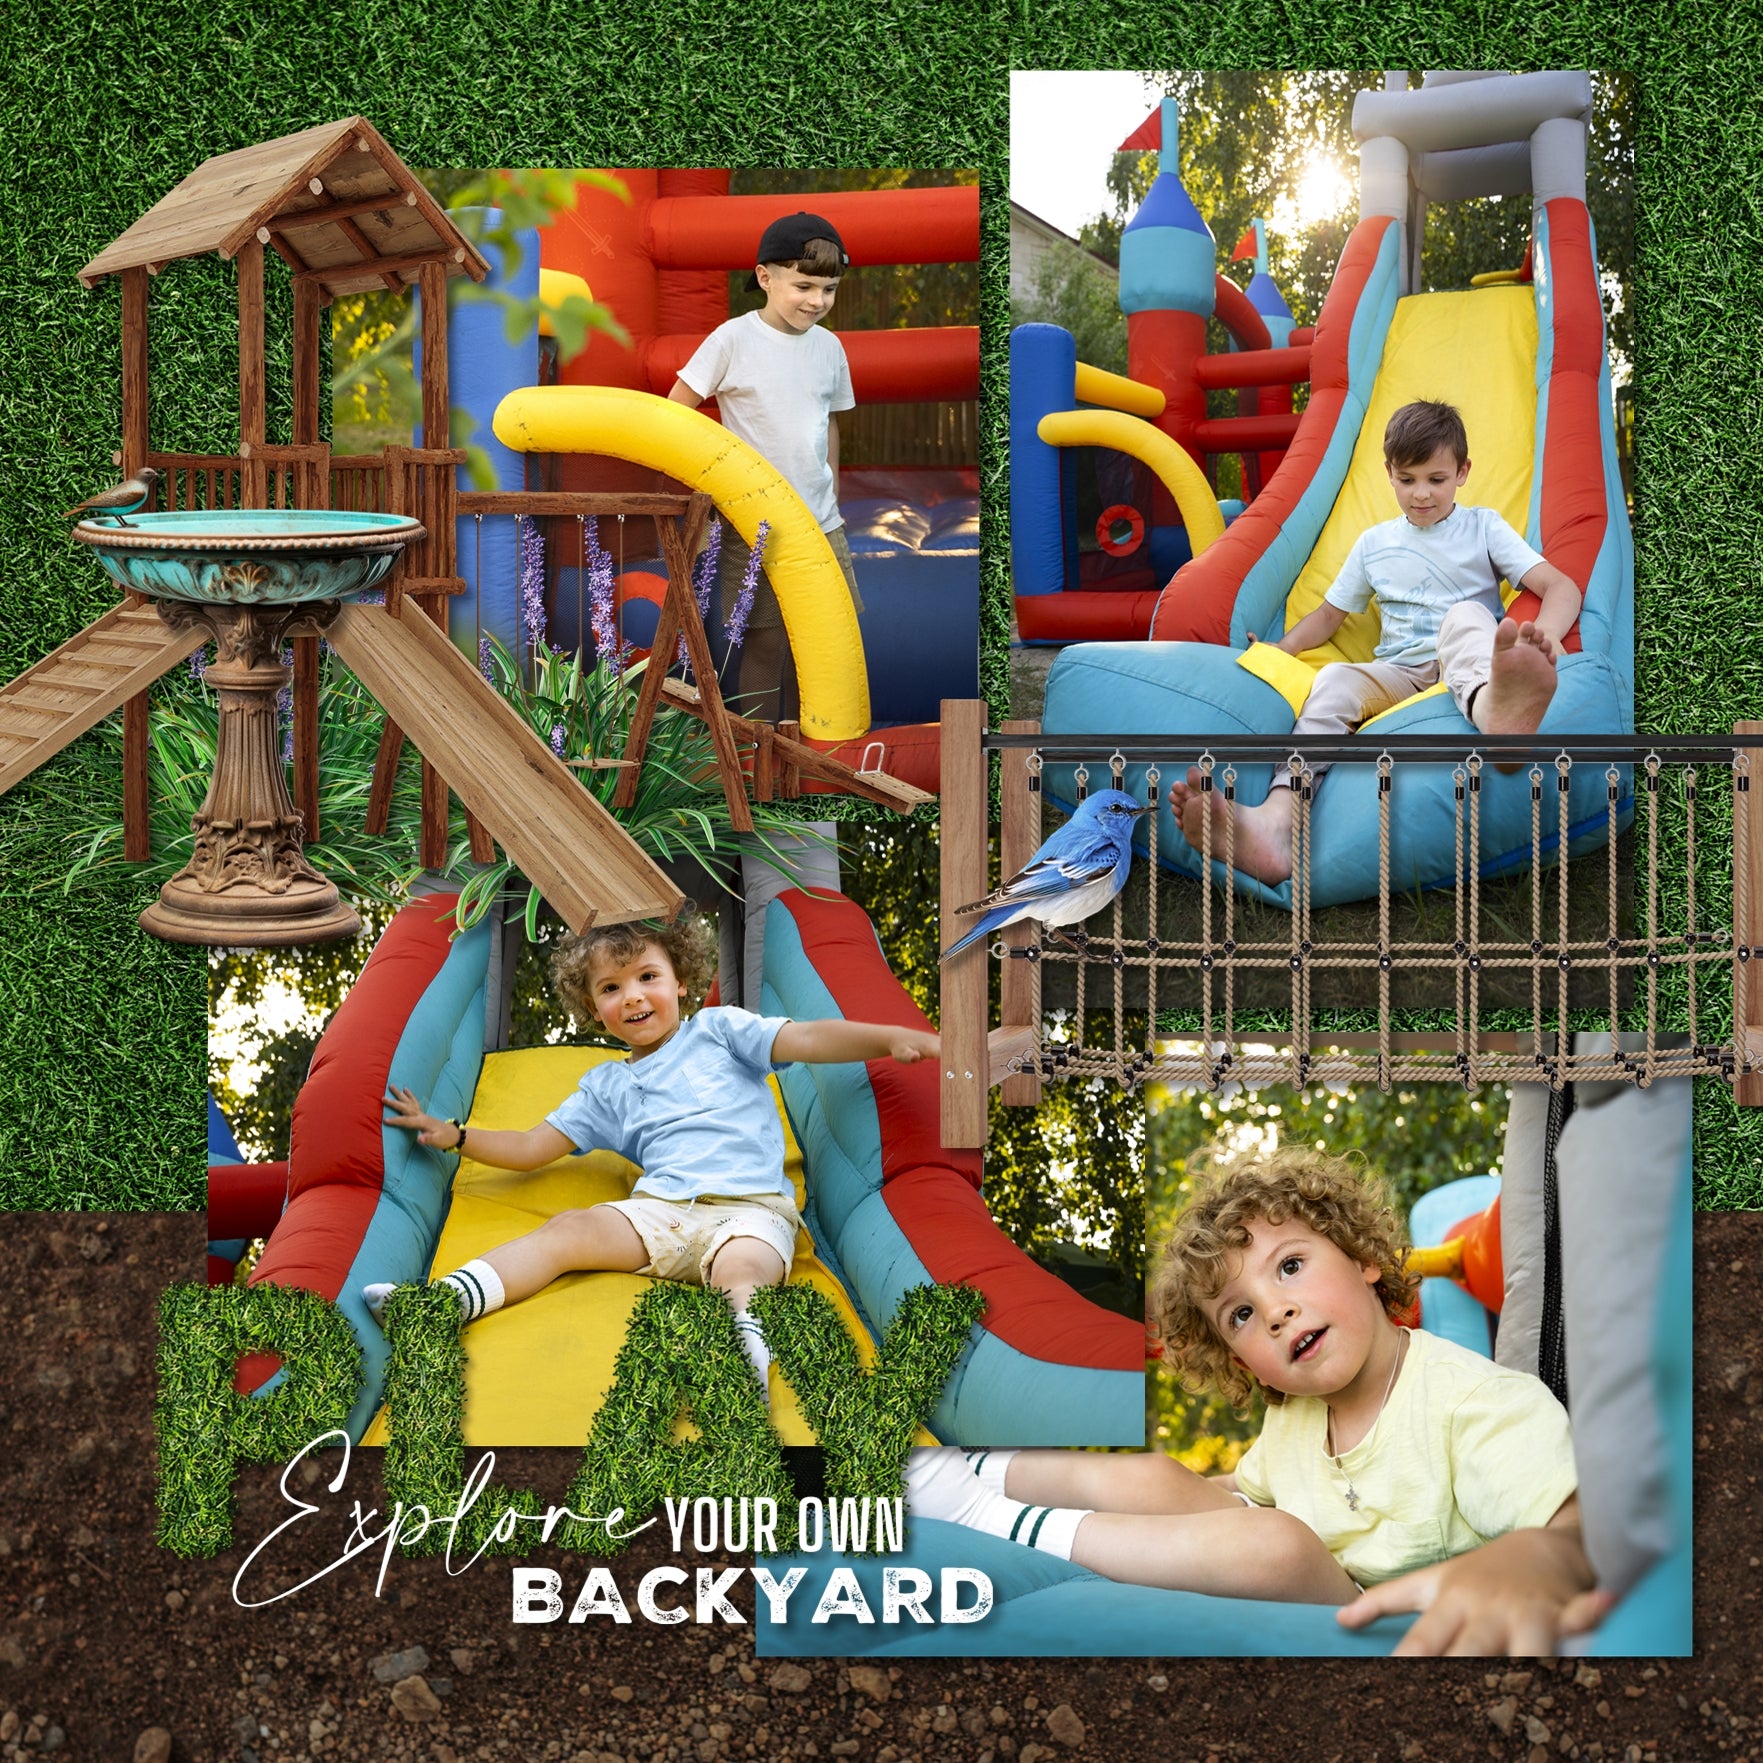 If you love playing in the backyard, mowing the lawn, landscaping, gardening, or enjoying the outdoors and nature, then this digital scrapbooking elements kit by Lucky Girl Creative digital art is what you are looking for. Embellishments include birds, hen, chicken, rooster, fox, groundhog, raccoon, squirrel, annual flowers, chicken coop, backyard, birdbath, bird house, brick, dirt, and more.